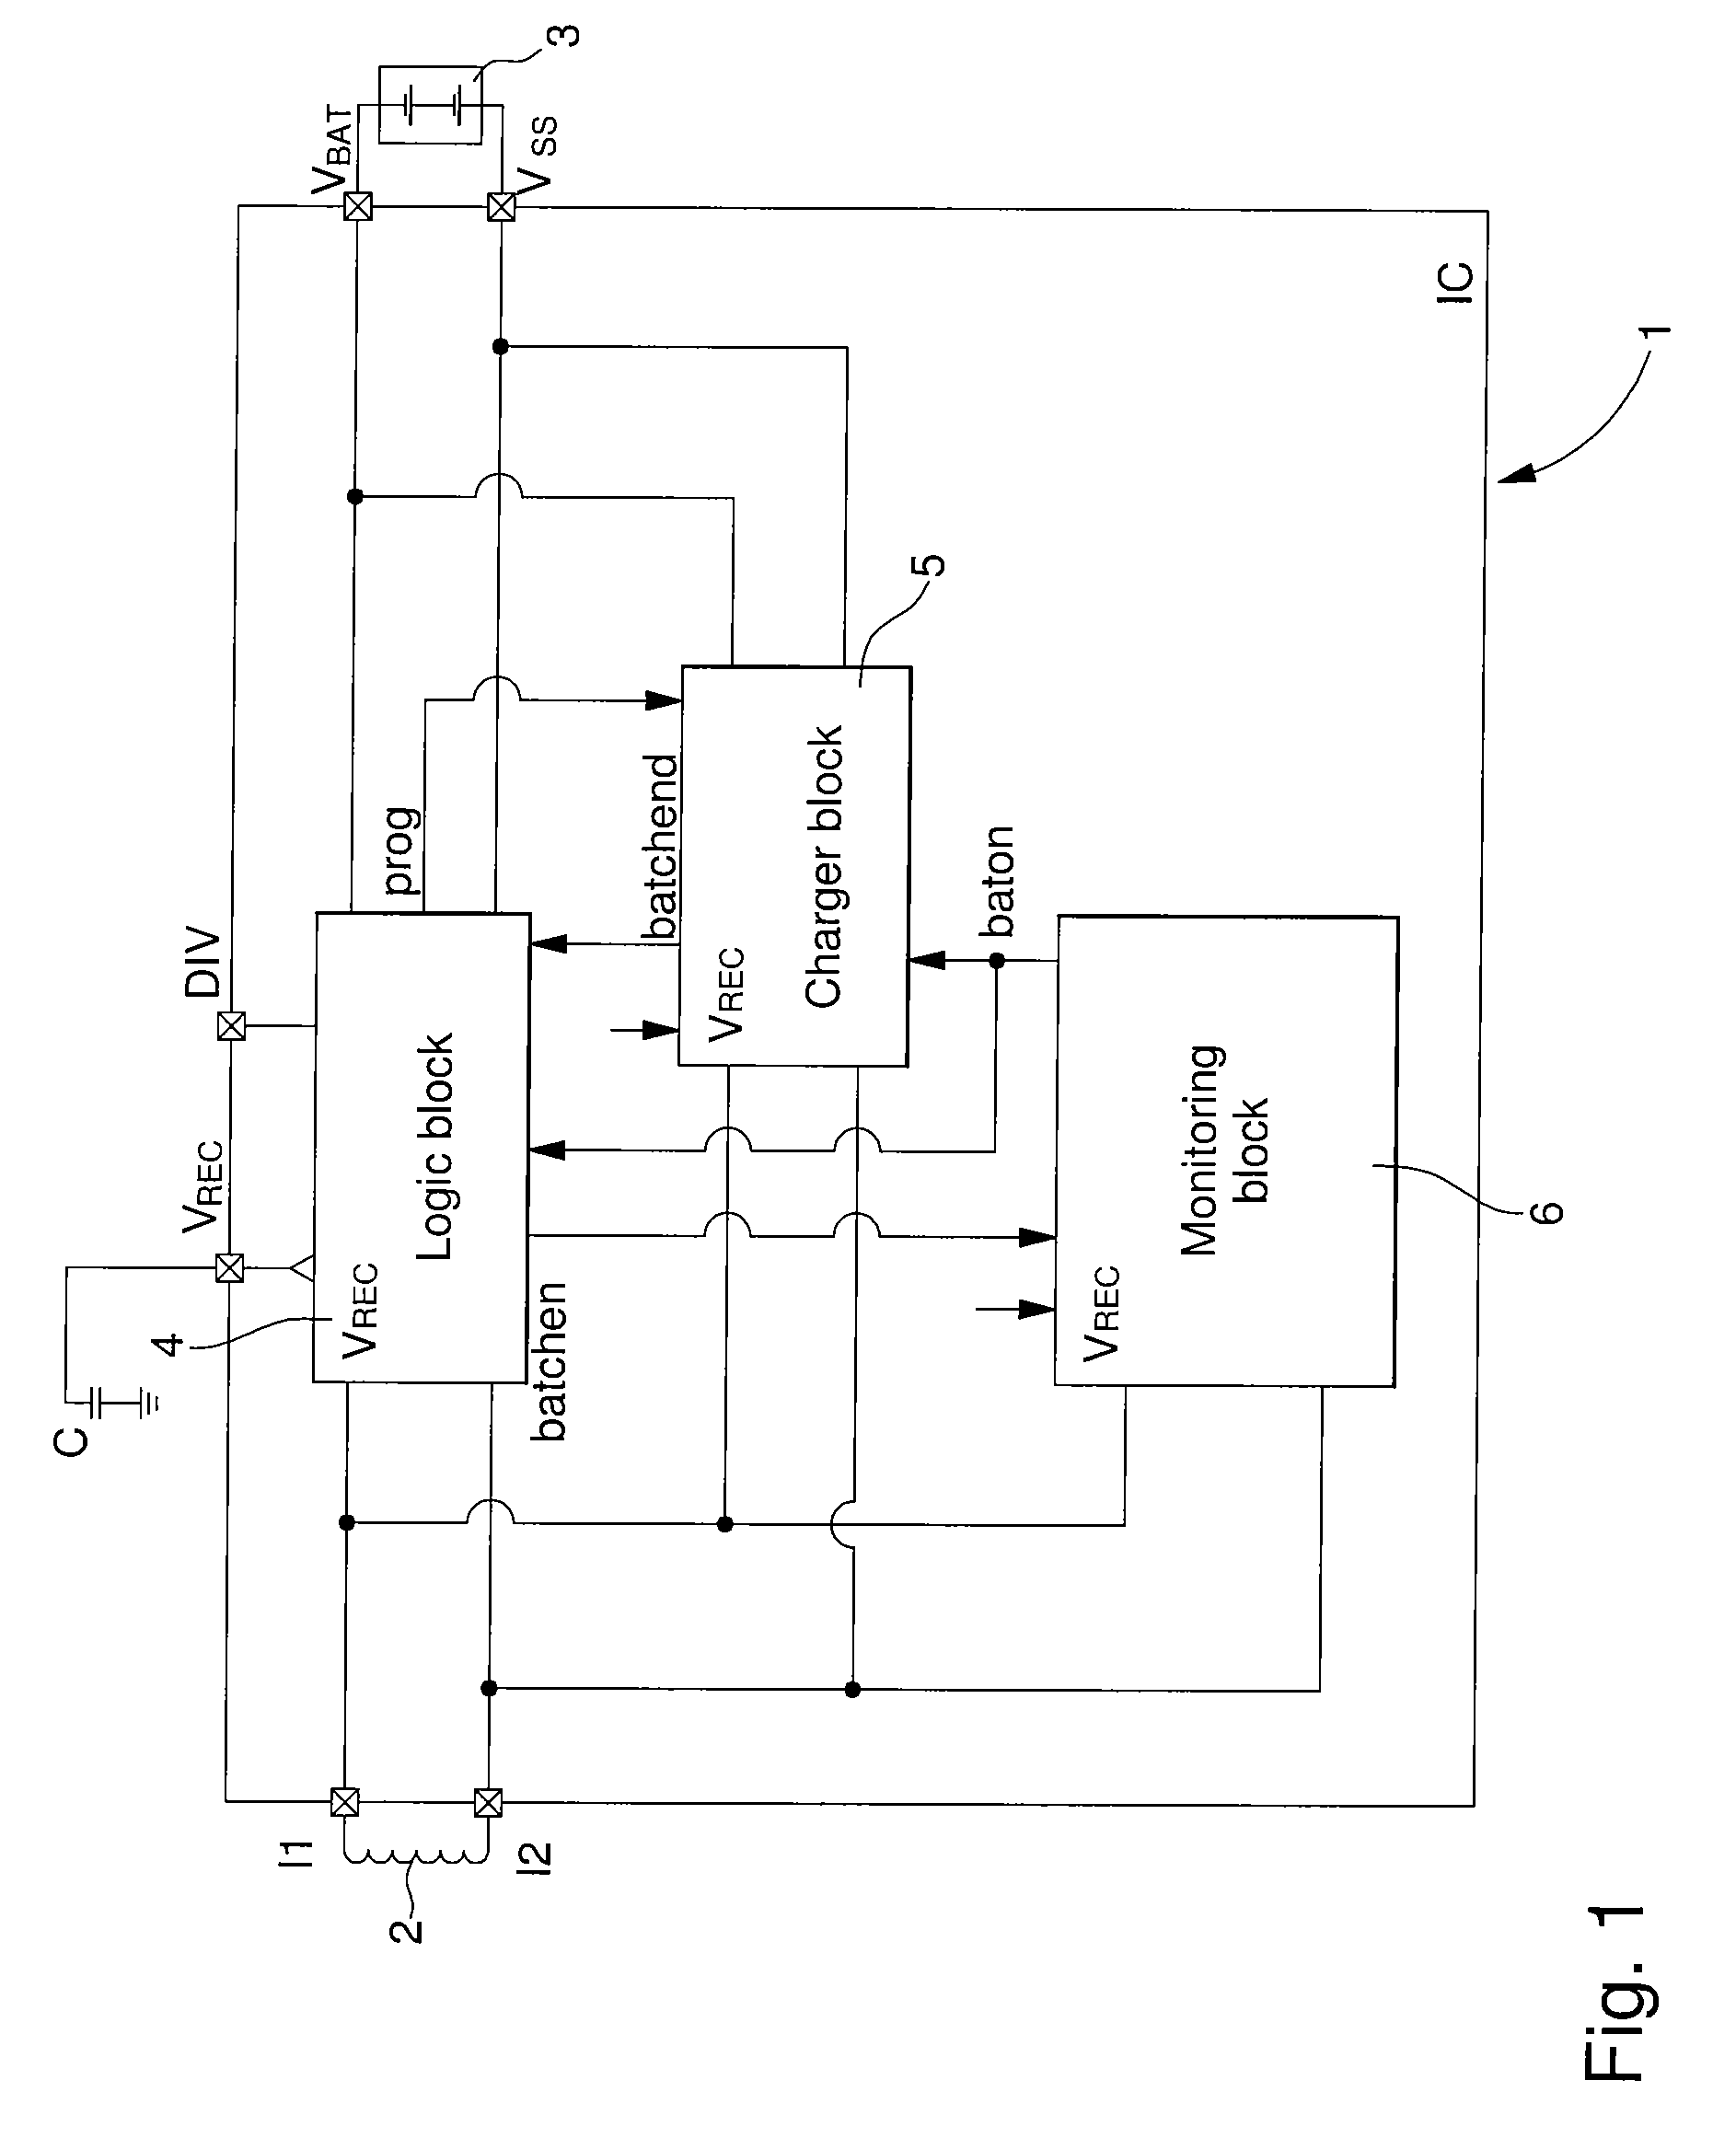 Battery charger operating “all or nothing” with a protective power supply circuit for monolithic integrated circuits using the antenna energy